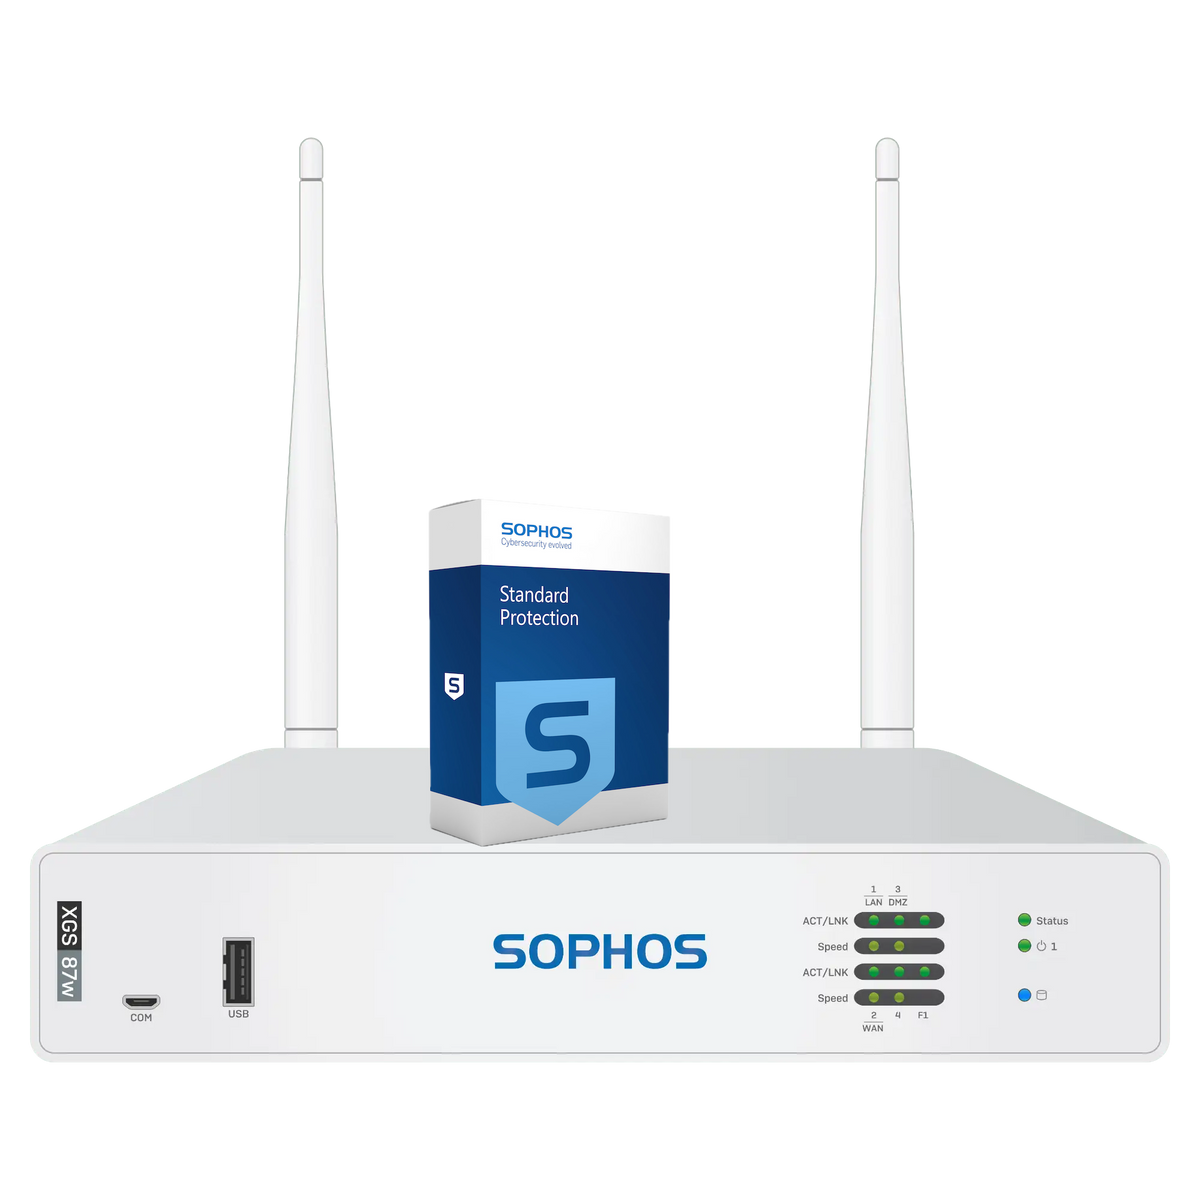 Sophos XGS 87w Firewall with Standard Protection, 3-year - EU power cord